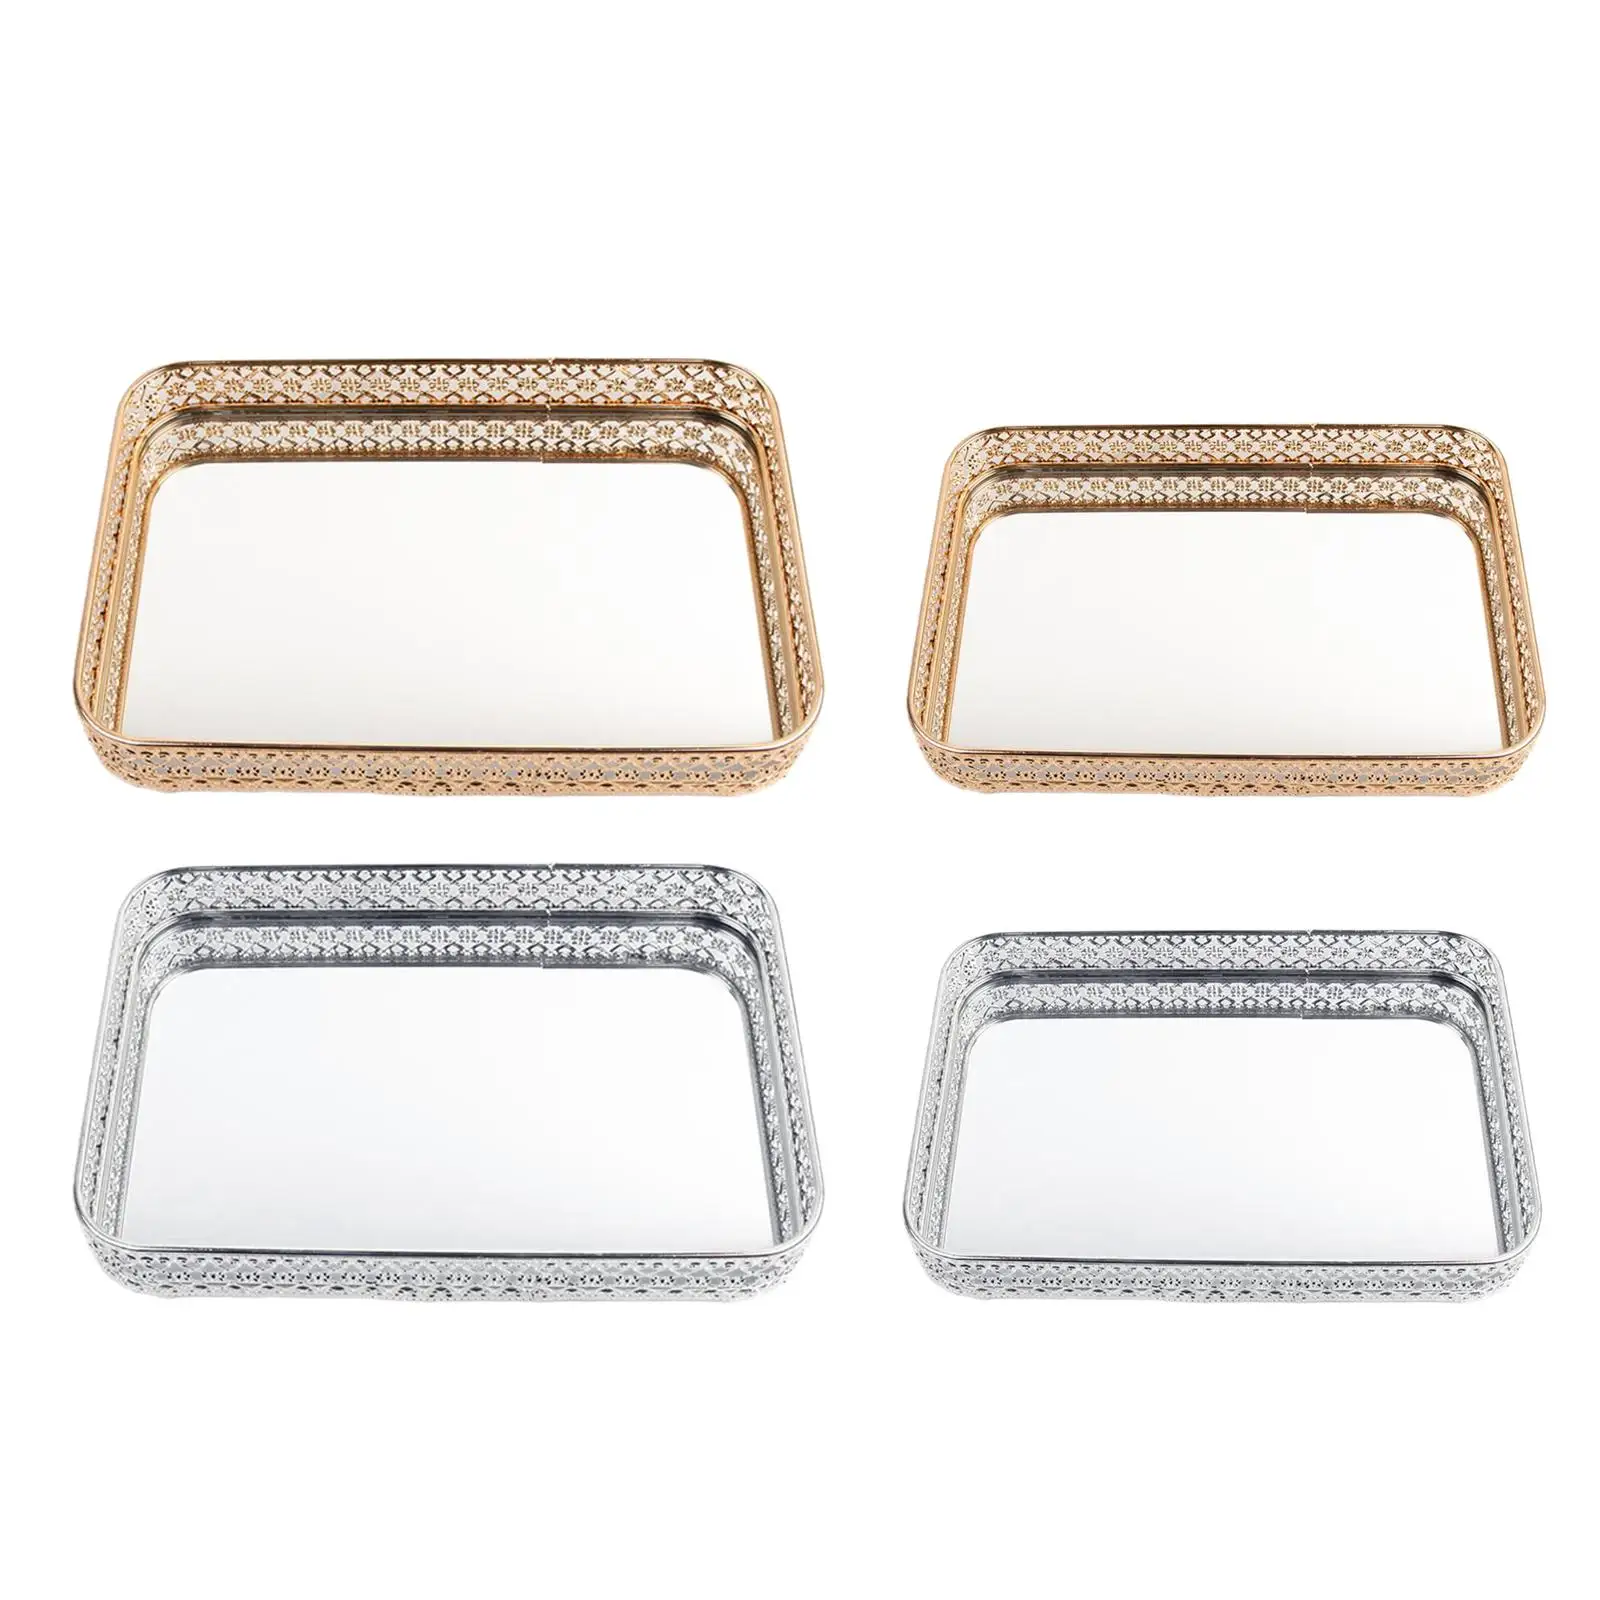 Mirror Finished Decorative Tray Cosmetic Makeup Tray Jewelry Trinket Organizer Tray for Bathroom Countertop Wedding Home Sister